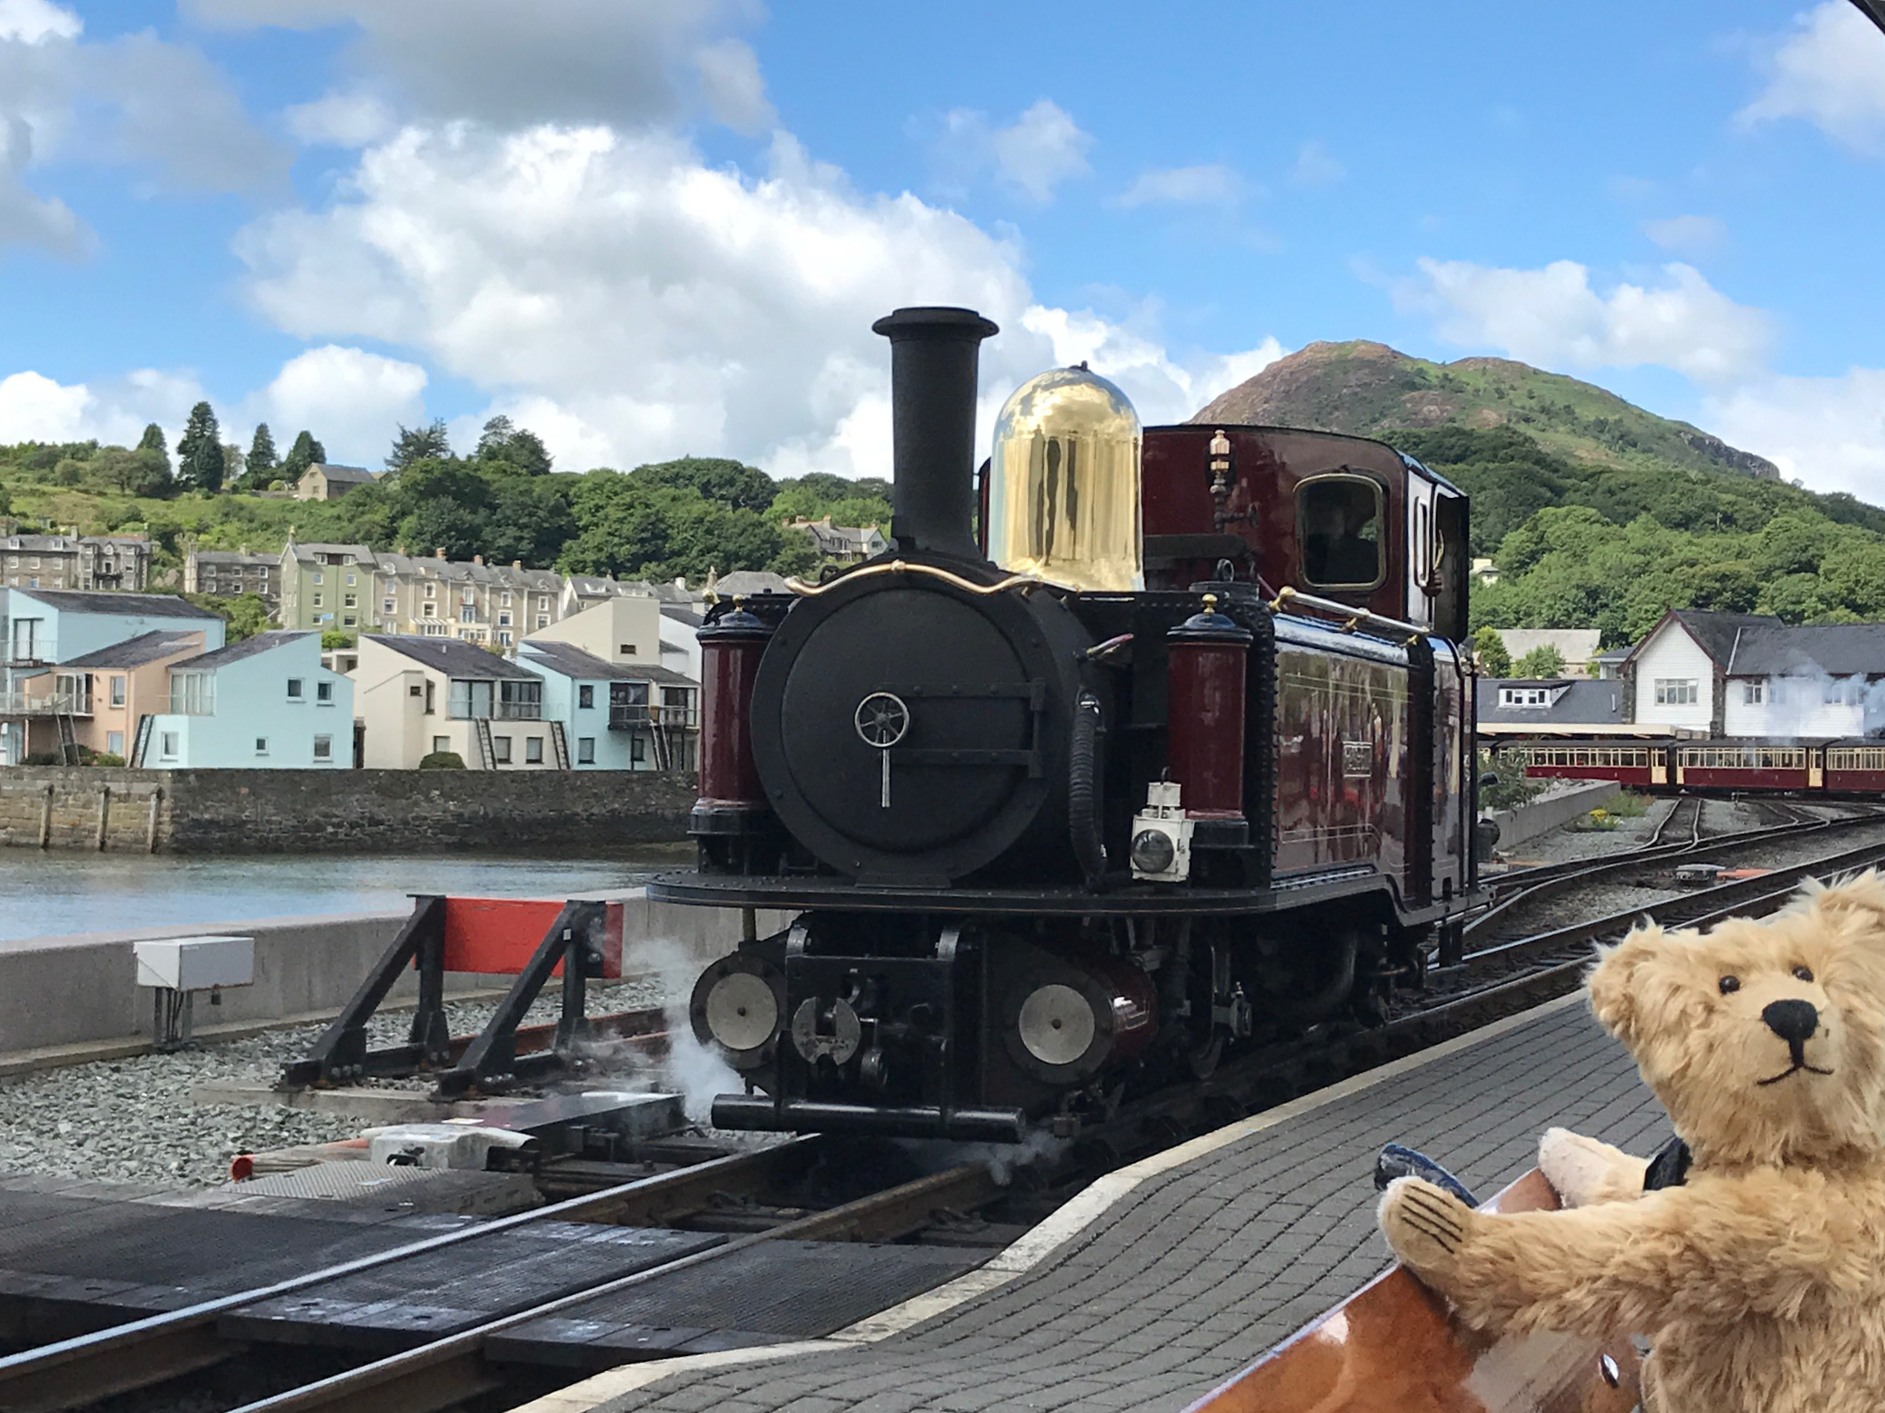 Great Little Trains of Wales: Portmadoc.